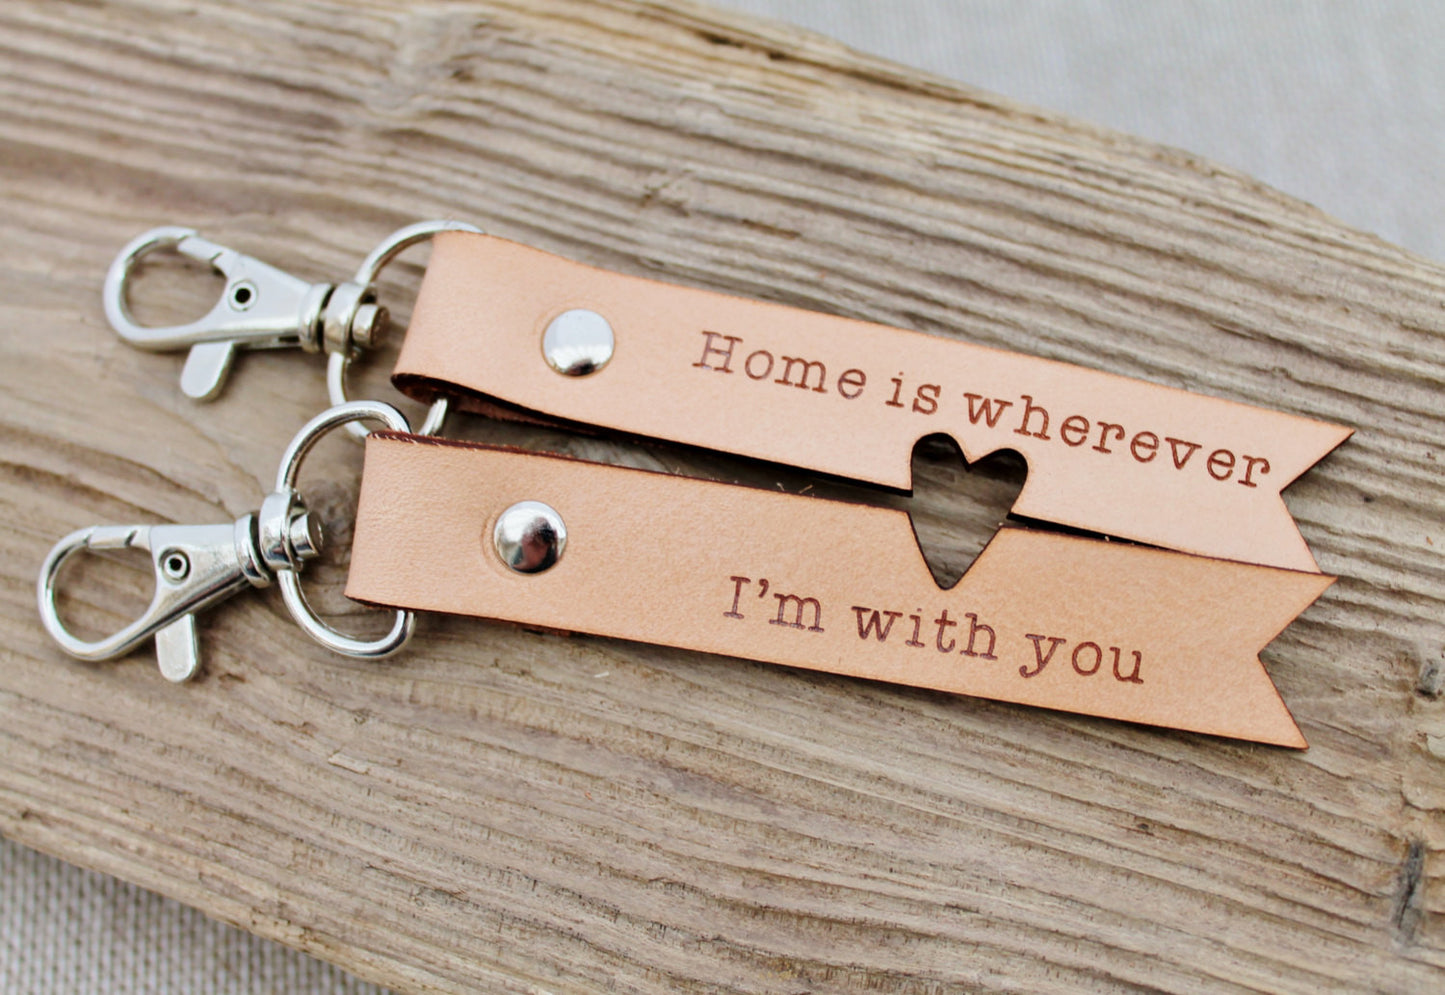 2 x Home is Wherever I'm With You Leather Keychains